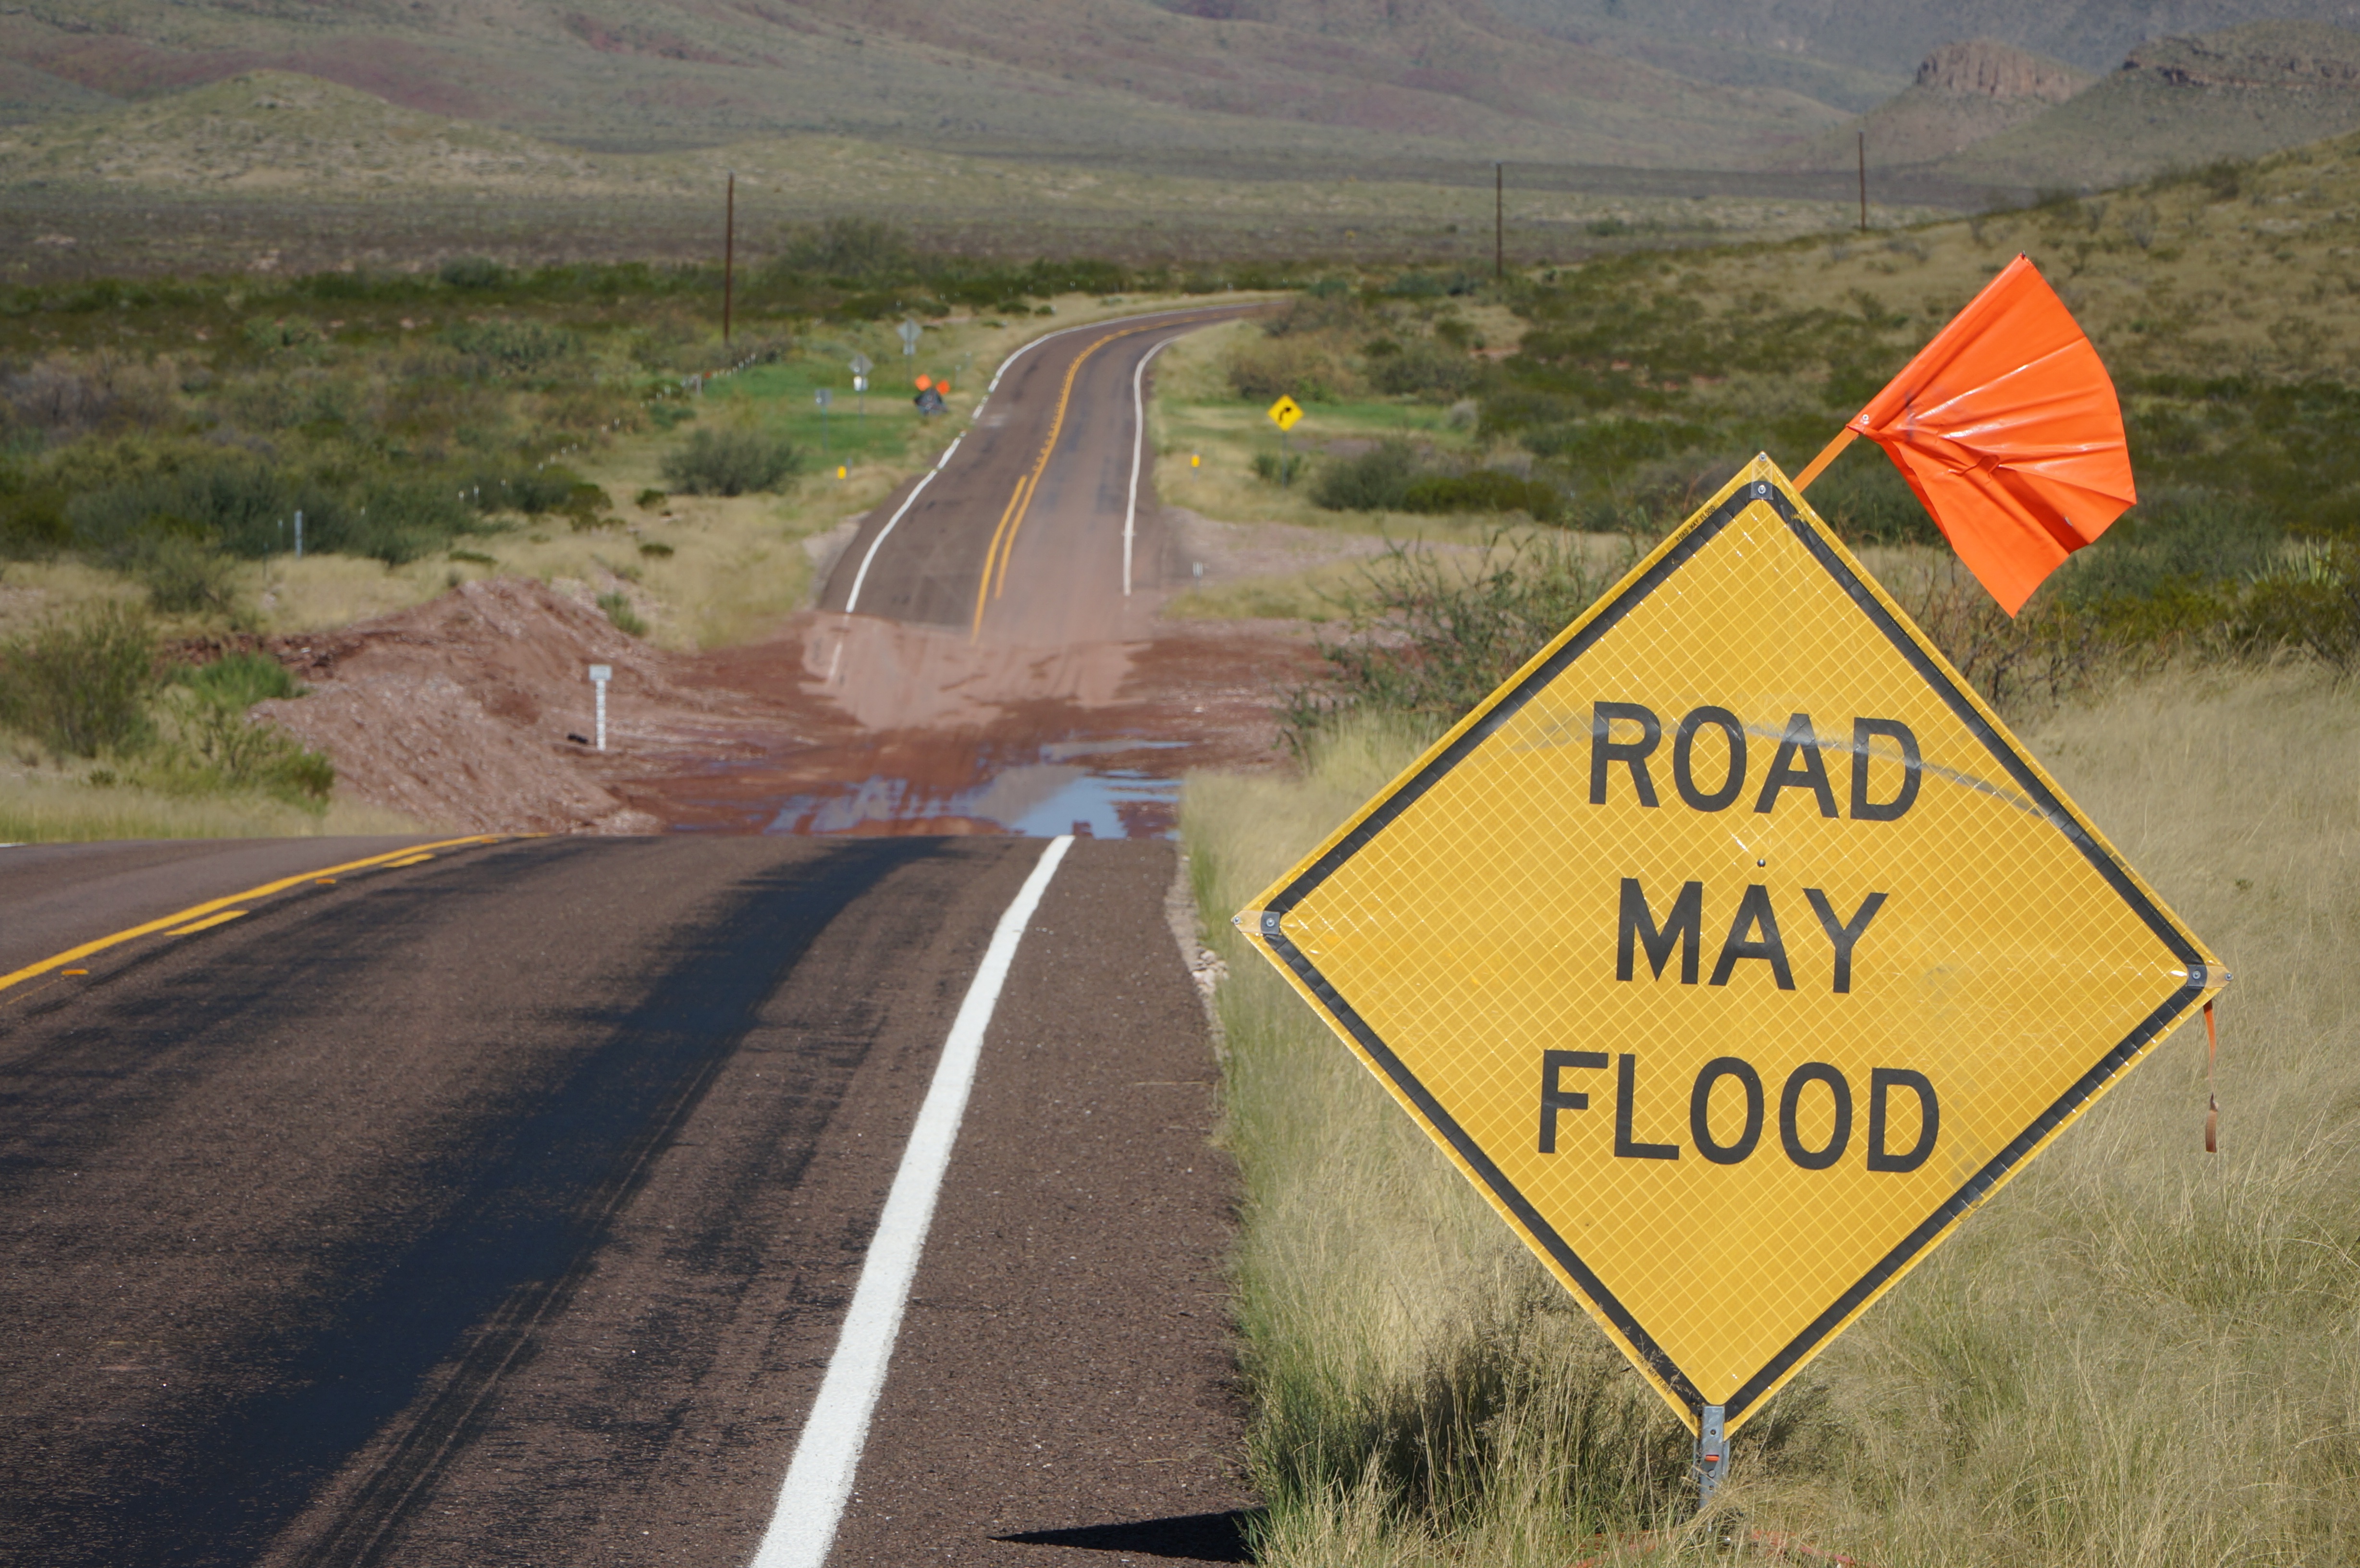 New flood model: Slight increases in rainfall can create major traffic disruptions